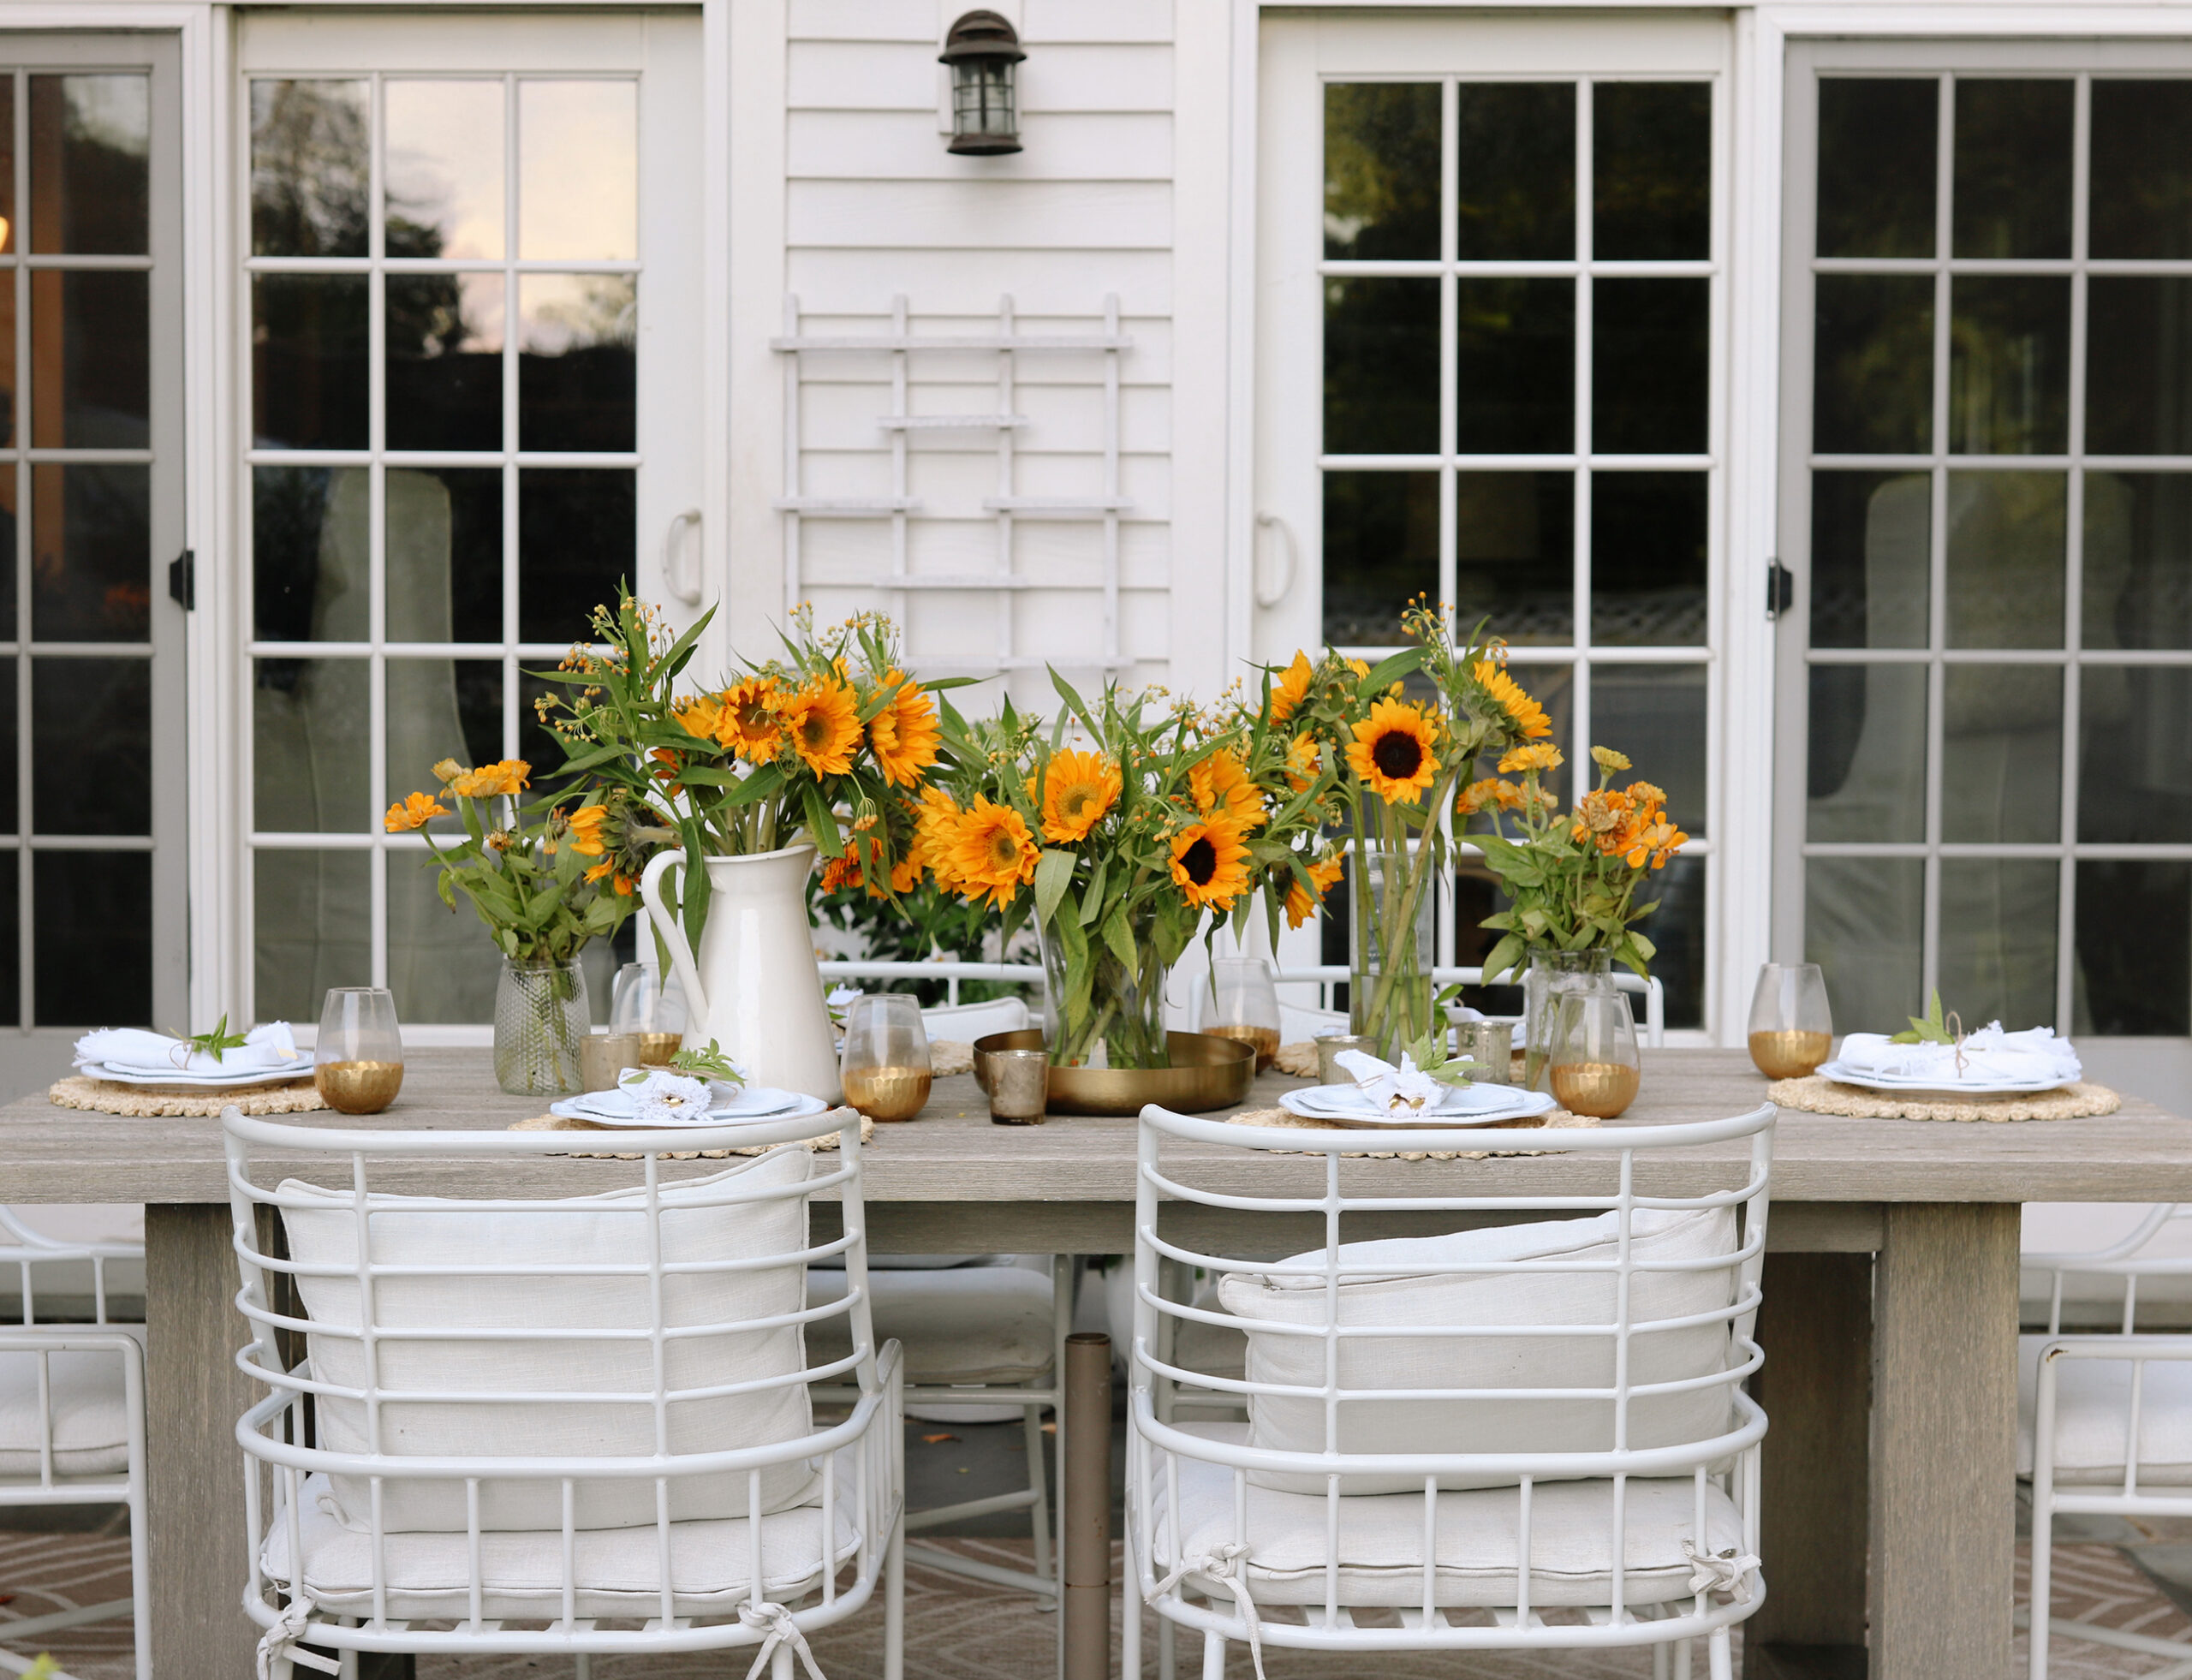 sunflowers in a vase, backyard sunflower party, harvest dinner, celebrate fall. || Darling Darleen Top Lifestyle CT Blogger